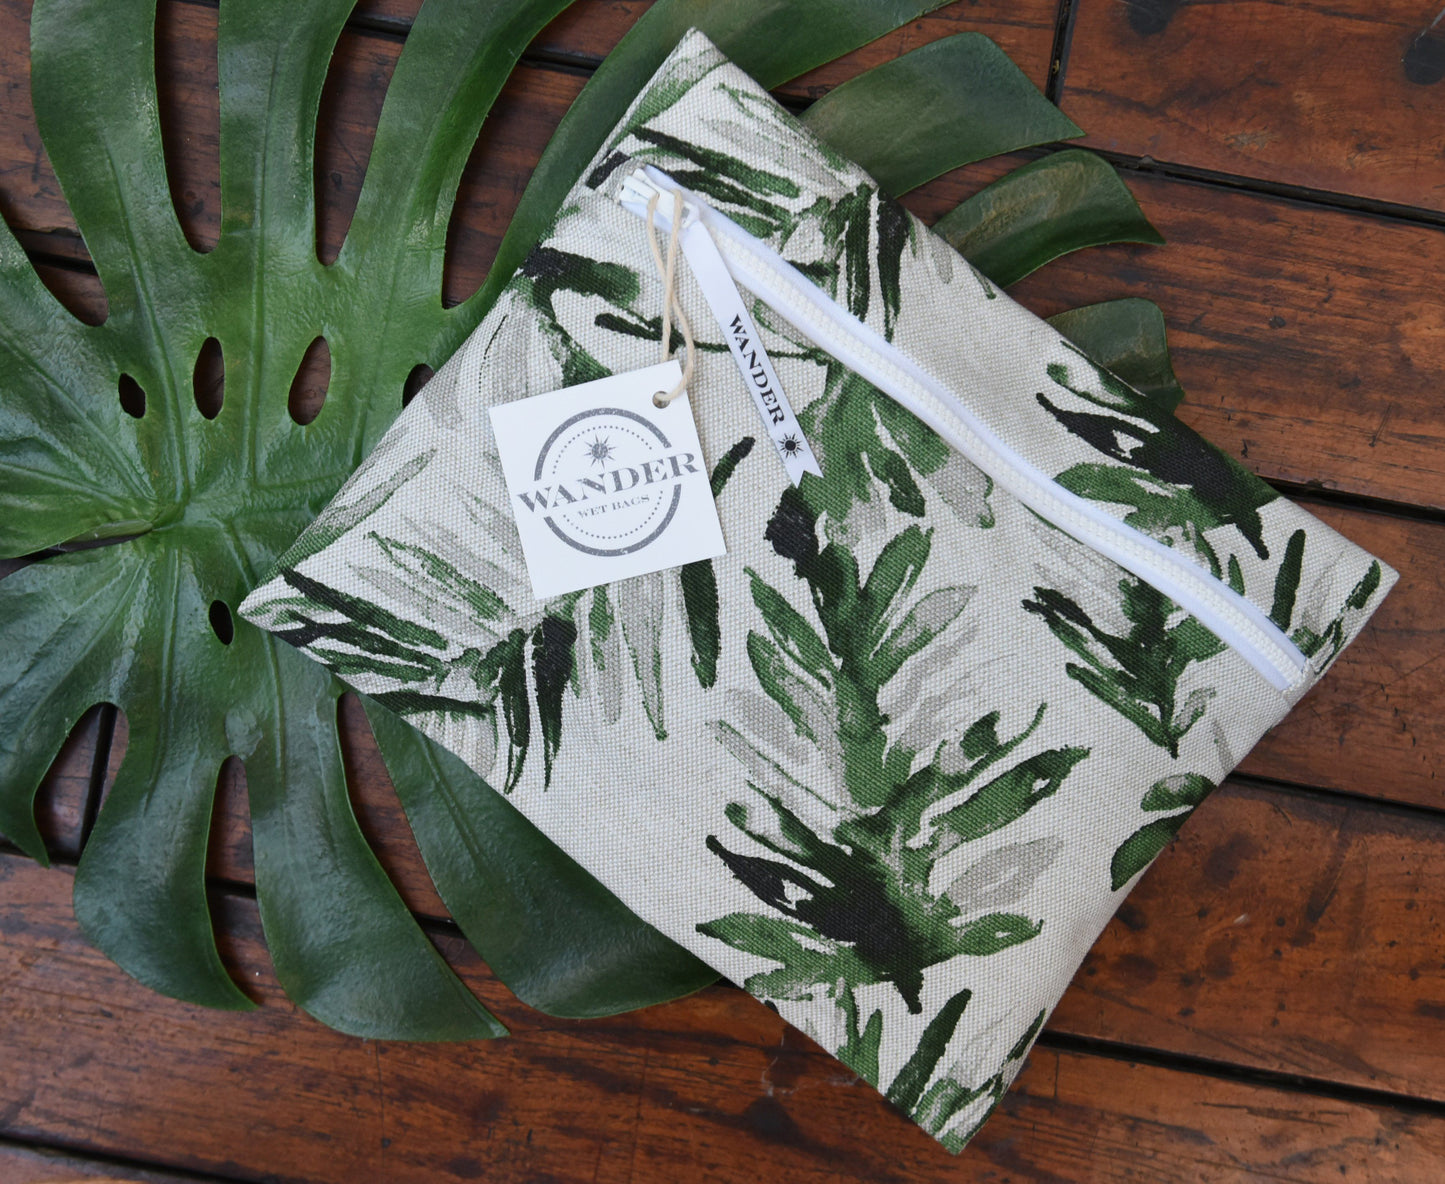 Stand Tall in Palm Frond Wet Bag | Wander Wet Bags, on a wood background